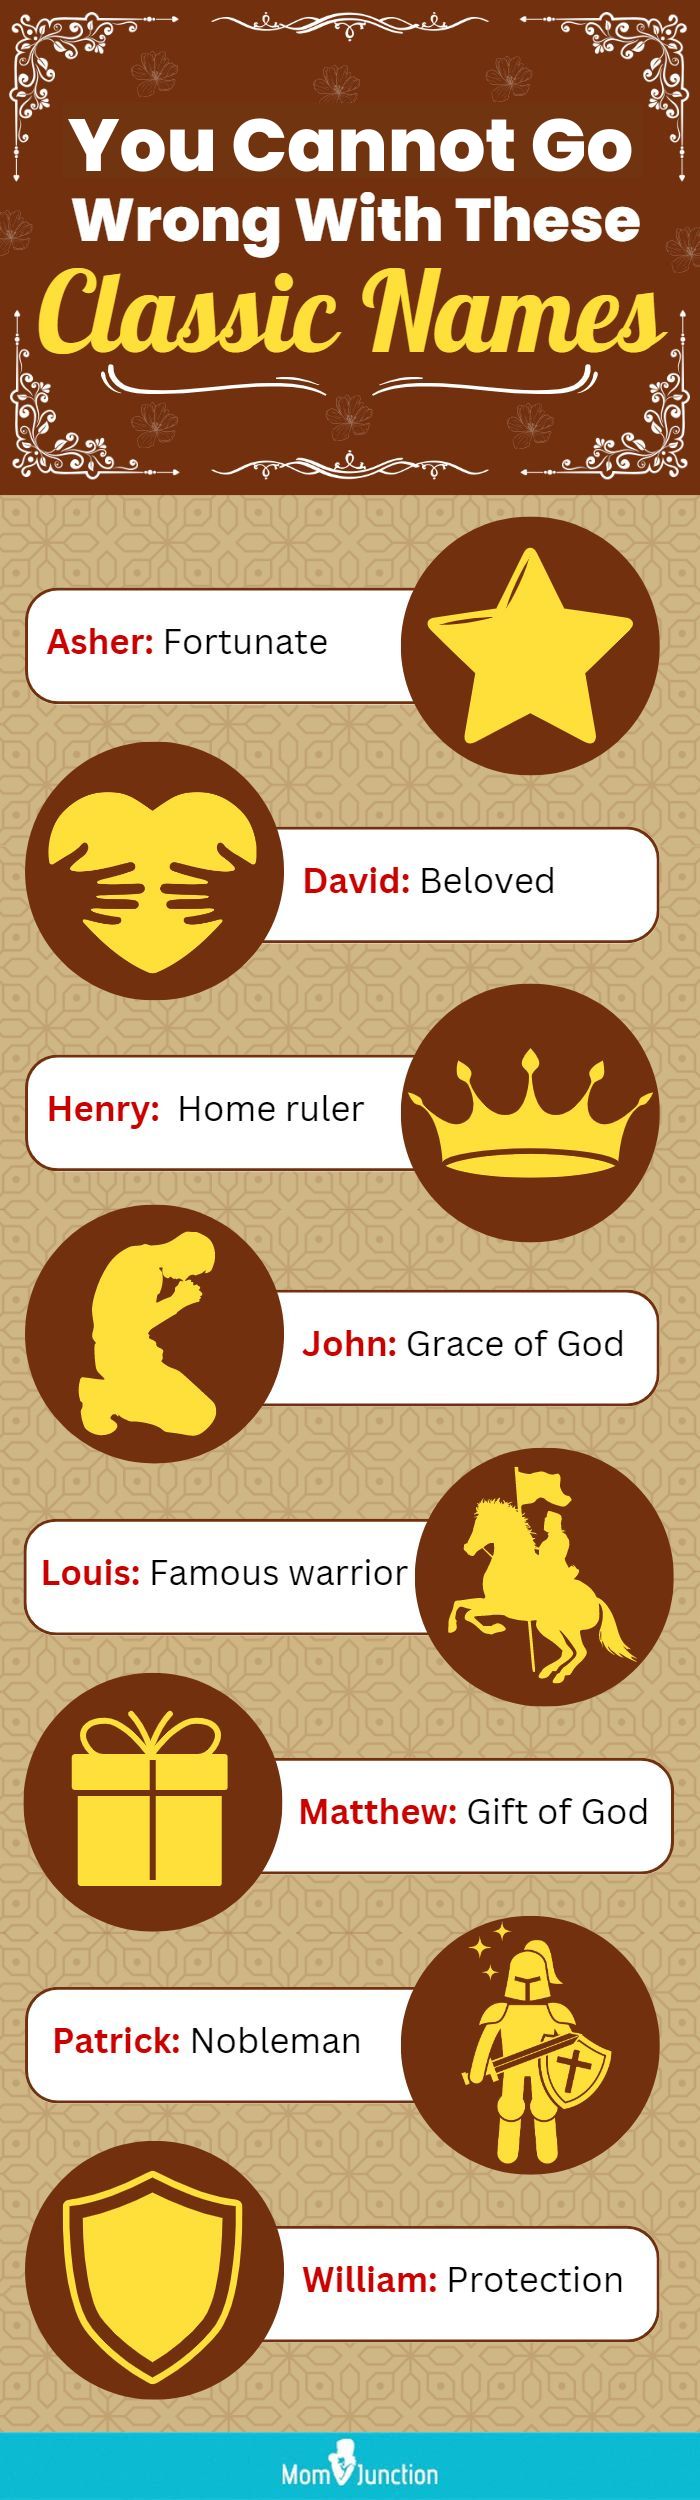 you can not go wrong with these classic names (infographic)